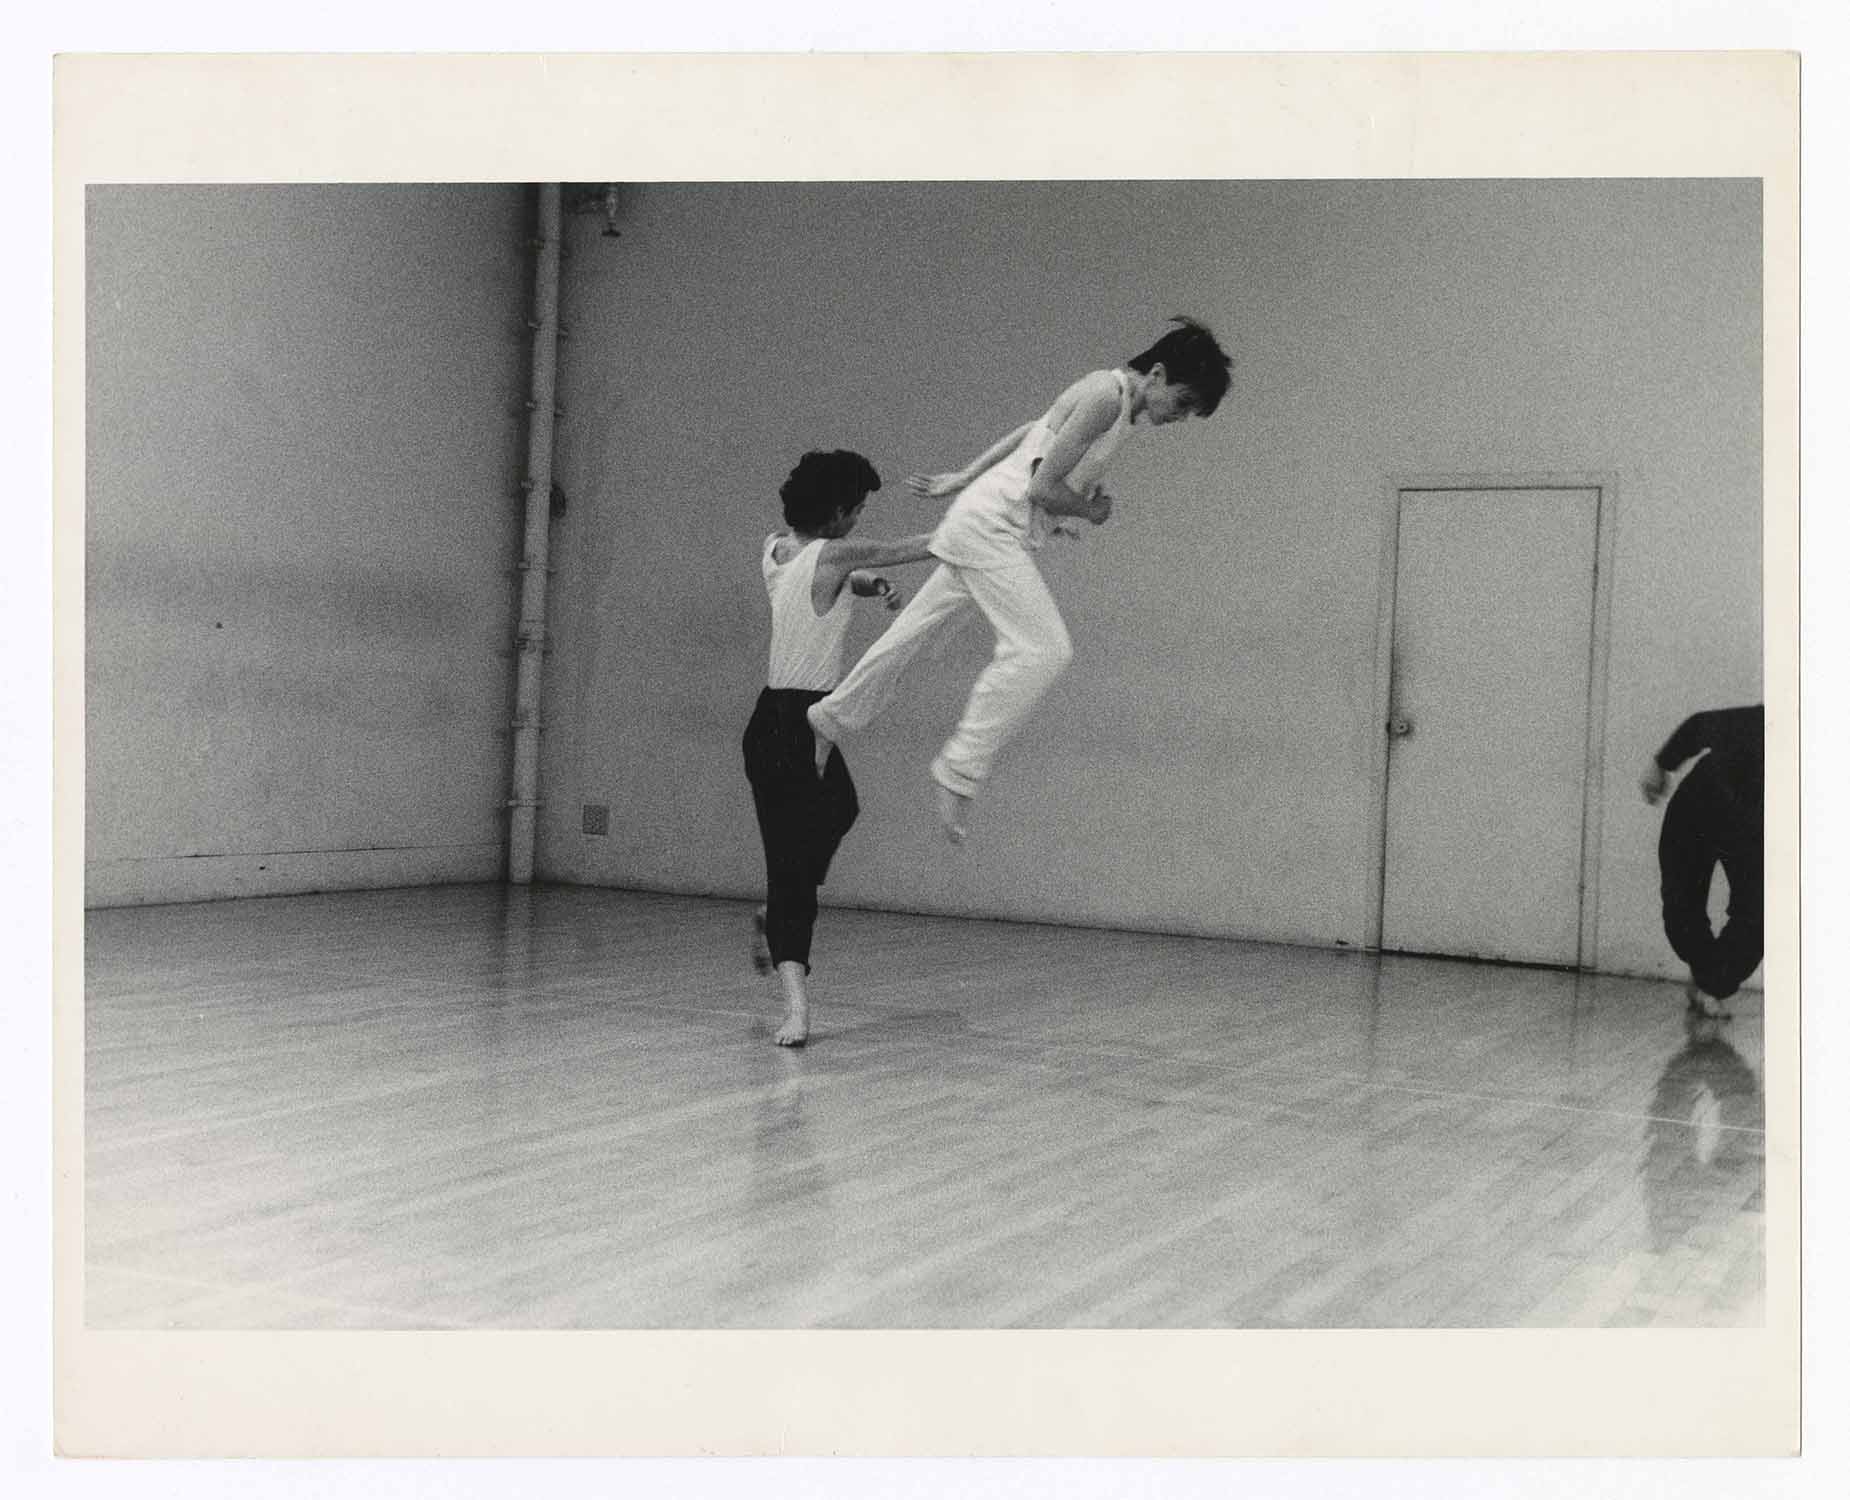 Vicky Shick and Diane Madden rehearsing Lateral Pass (1985) at Trisha Brown's loft in Lower Manhattan. Photograph © Paul Trachtman.